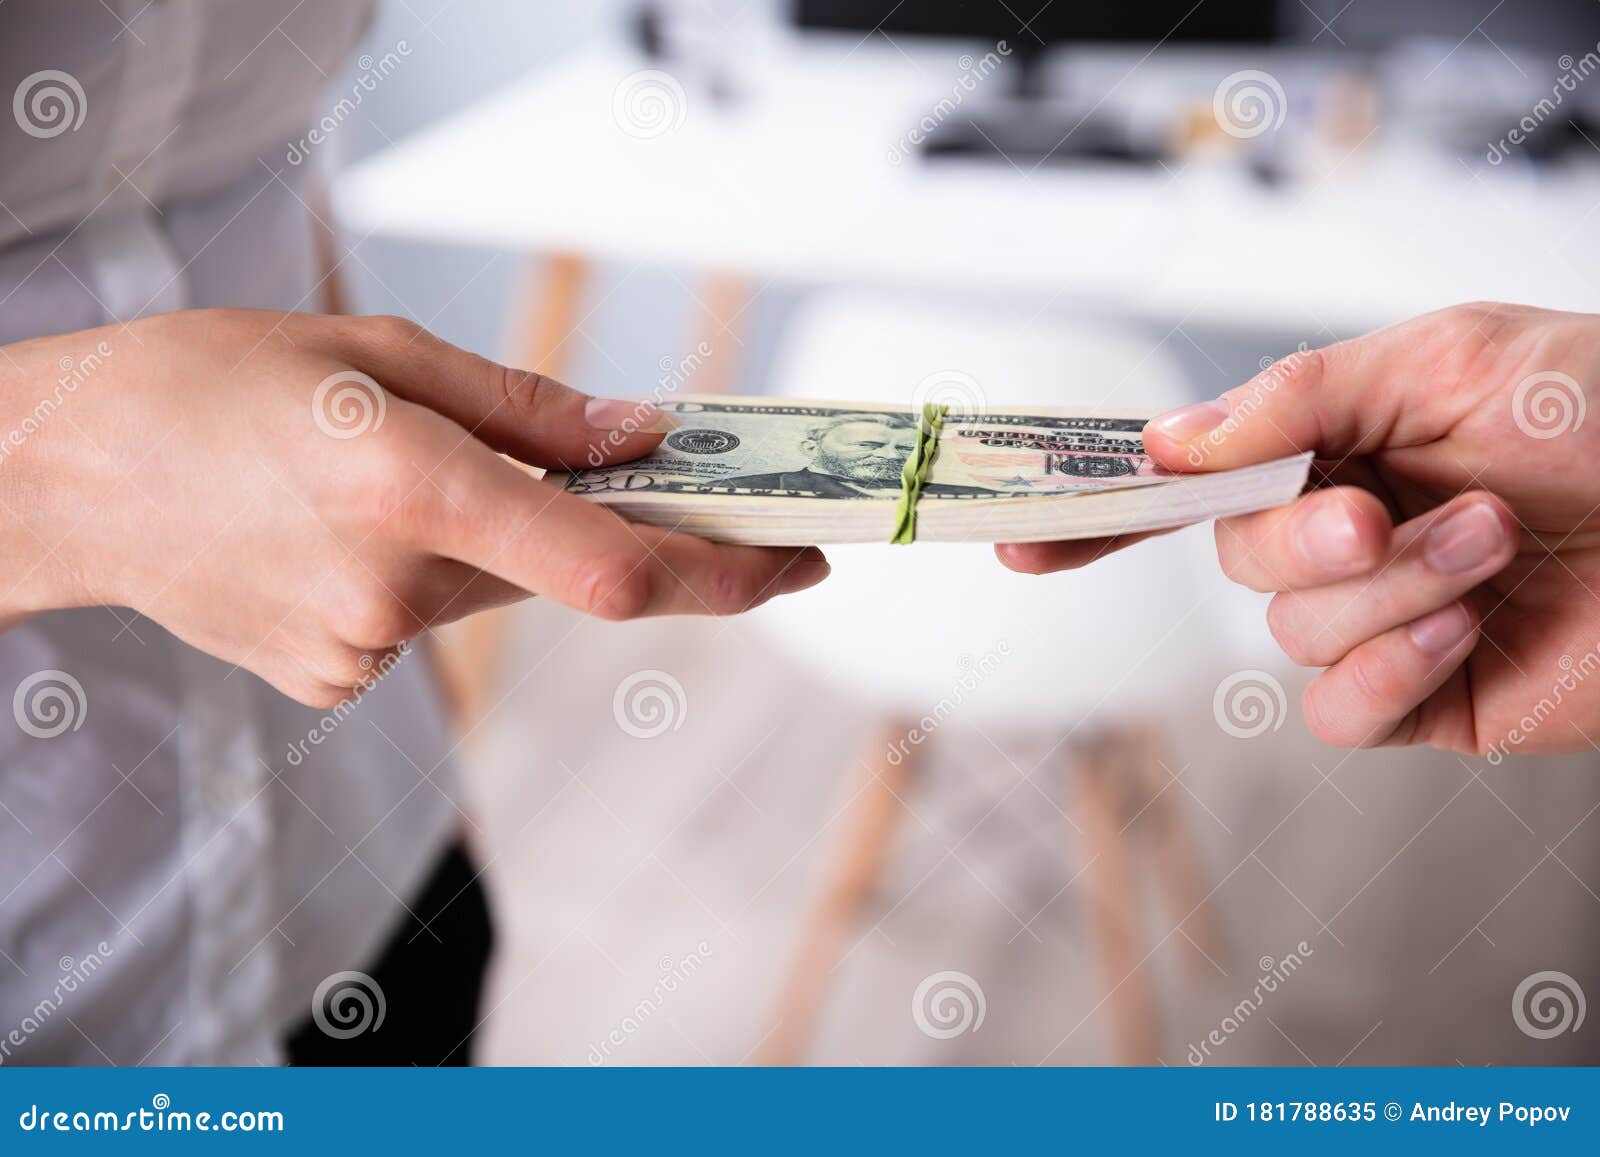 human`s hand exchanging the money